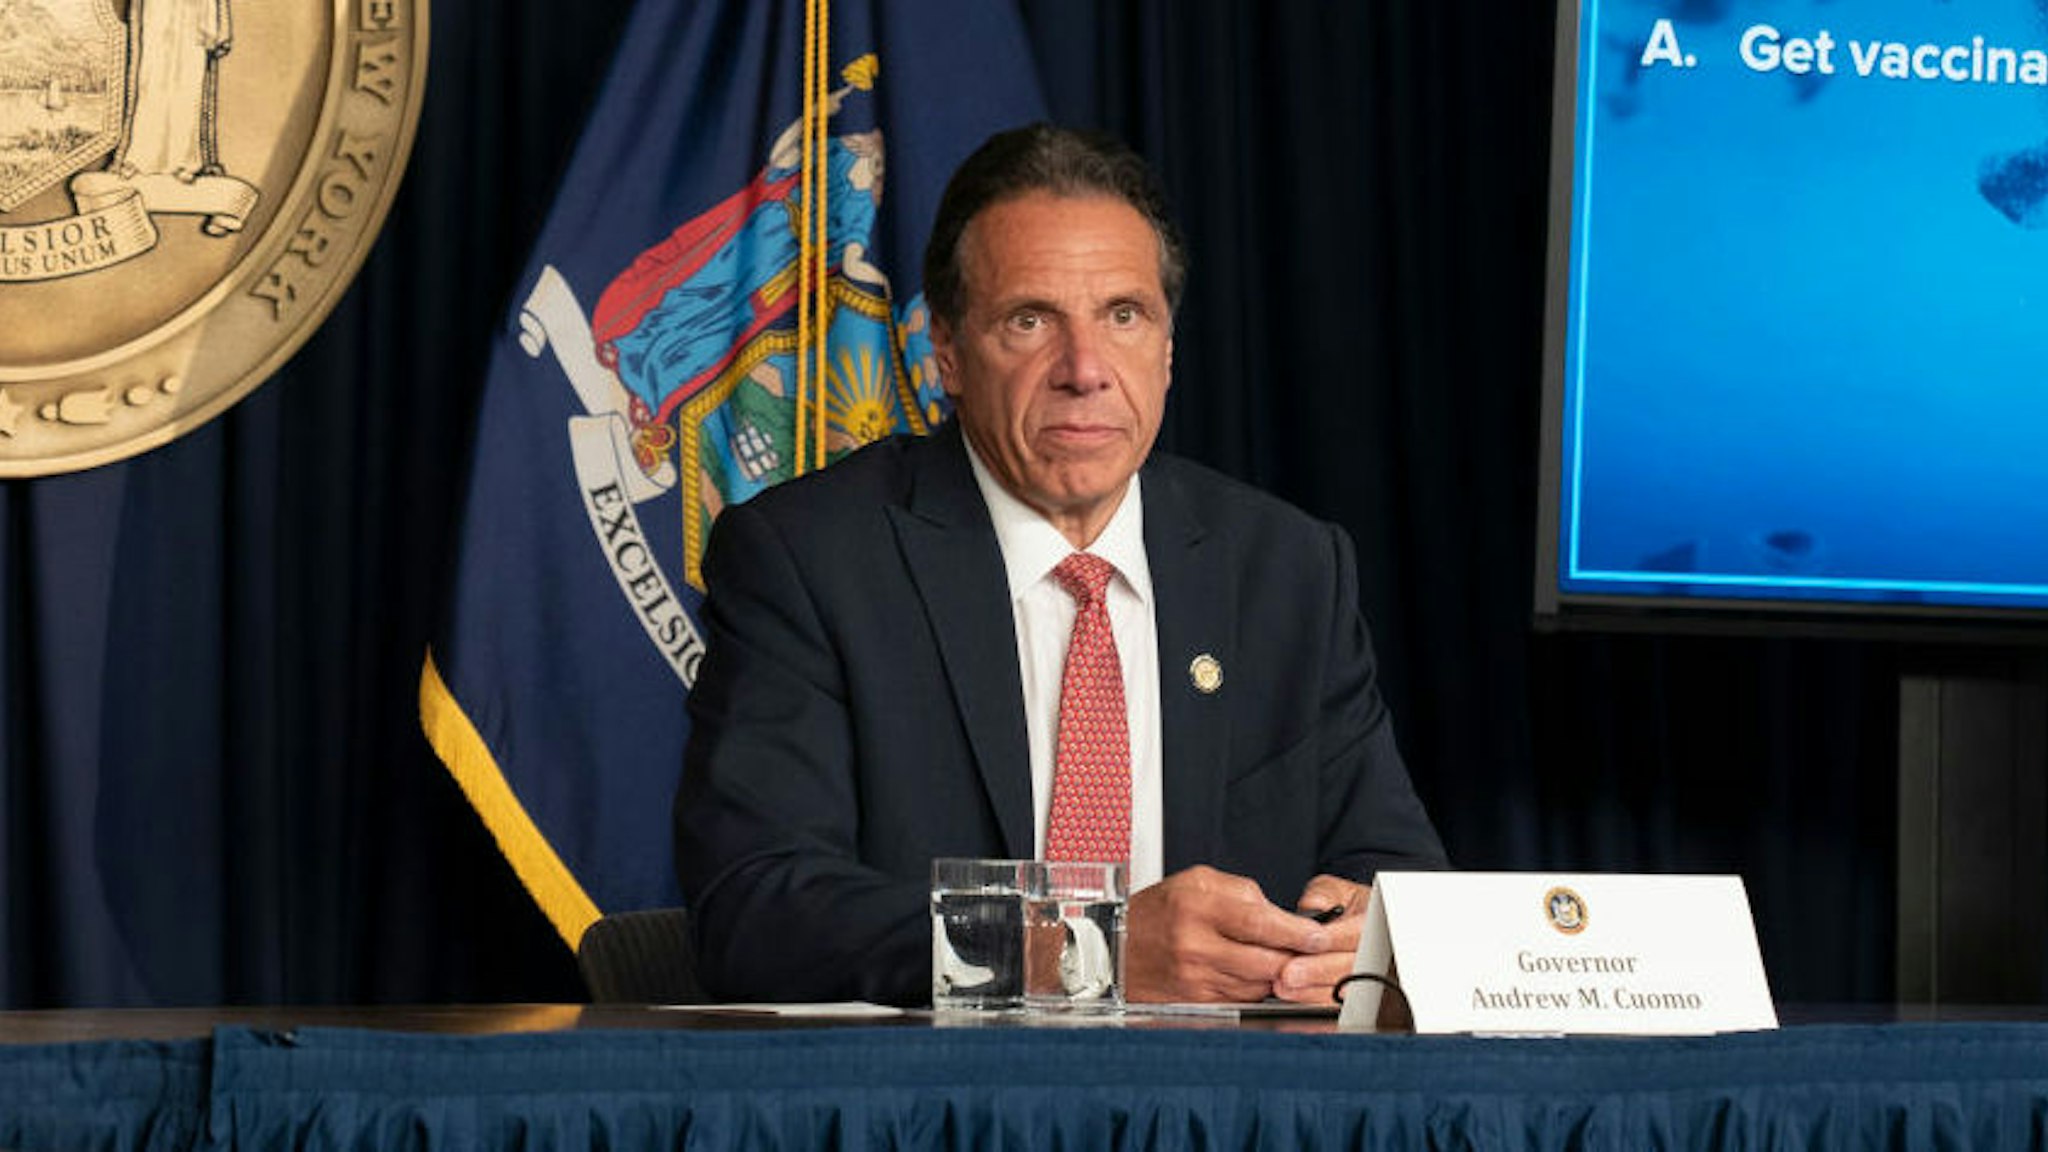 NEW YORK, UNITED STATES - 2021/08/02: Governor Andrew Cuomo holds press briefing and makes announcement to combat COVID-19 Delta variant at 633 3rd Avenue. Governor announced that employees of MTA (Metropolitan Transportation Authority) and New York Port Authority will be required to get vaccinated or be tested weekly starting Labor Day in order to get to work. He also urged private employers to follow the state.